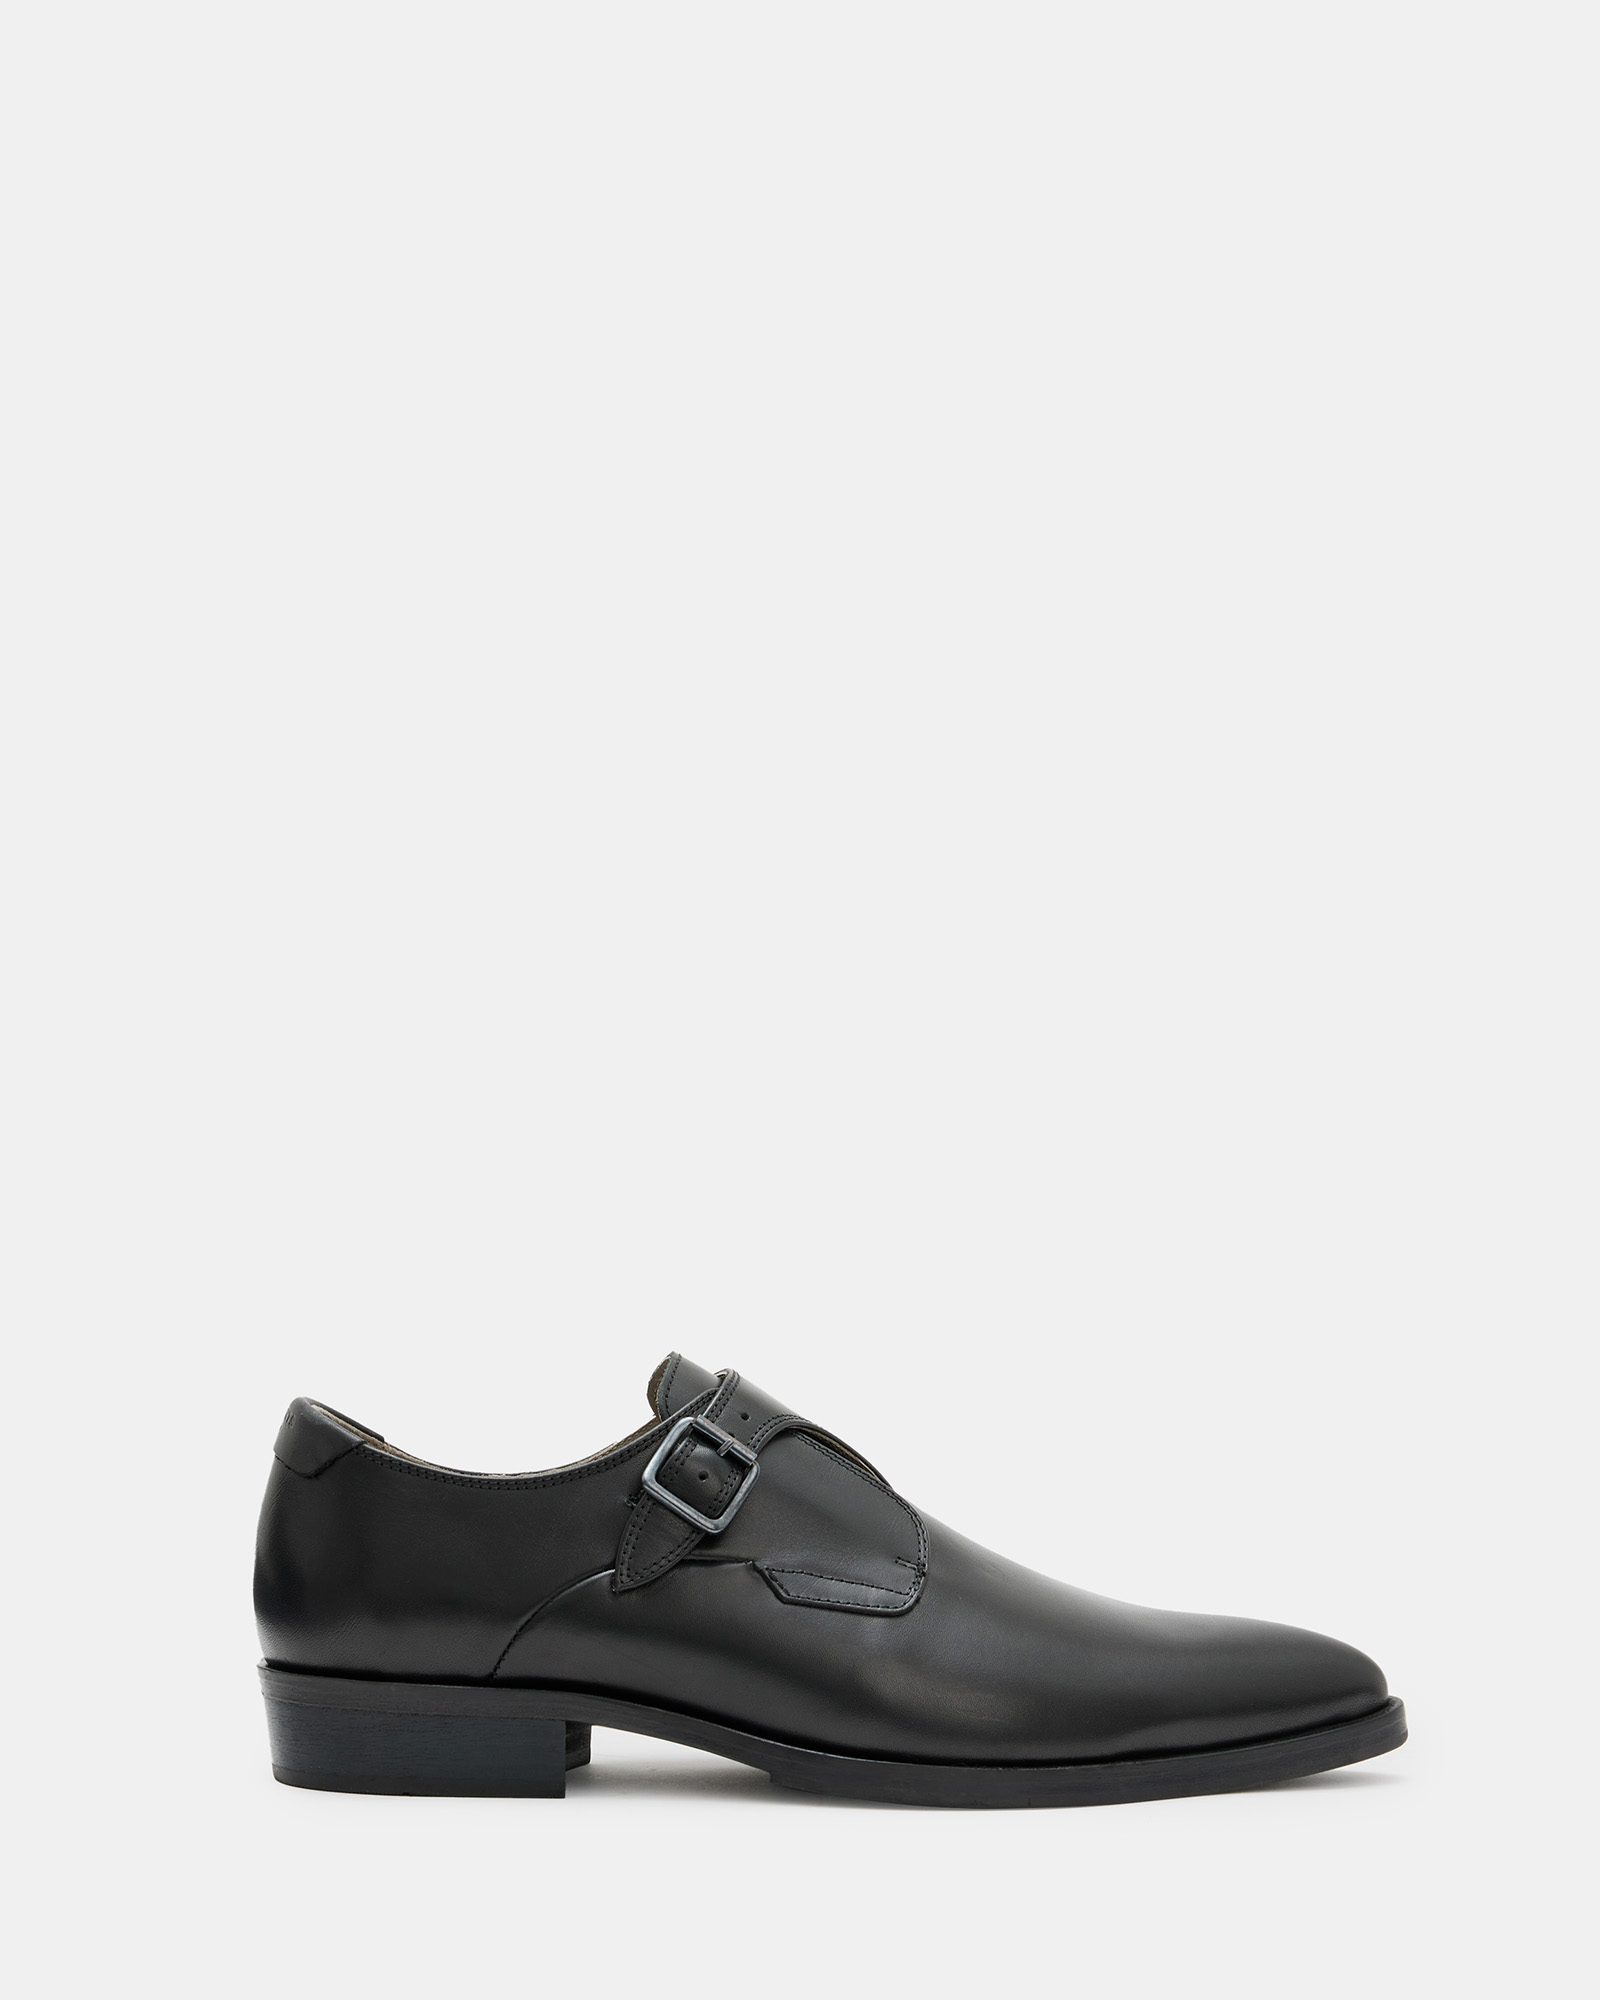 AllSaints Keith Leather Buckle Monk Shoes